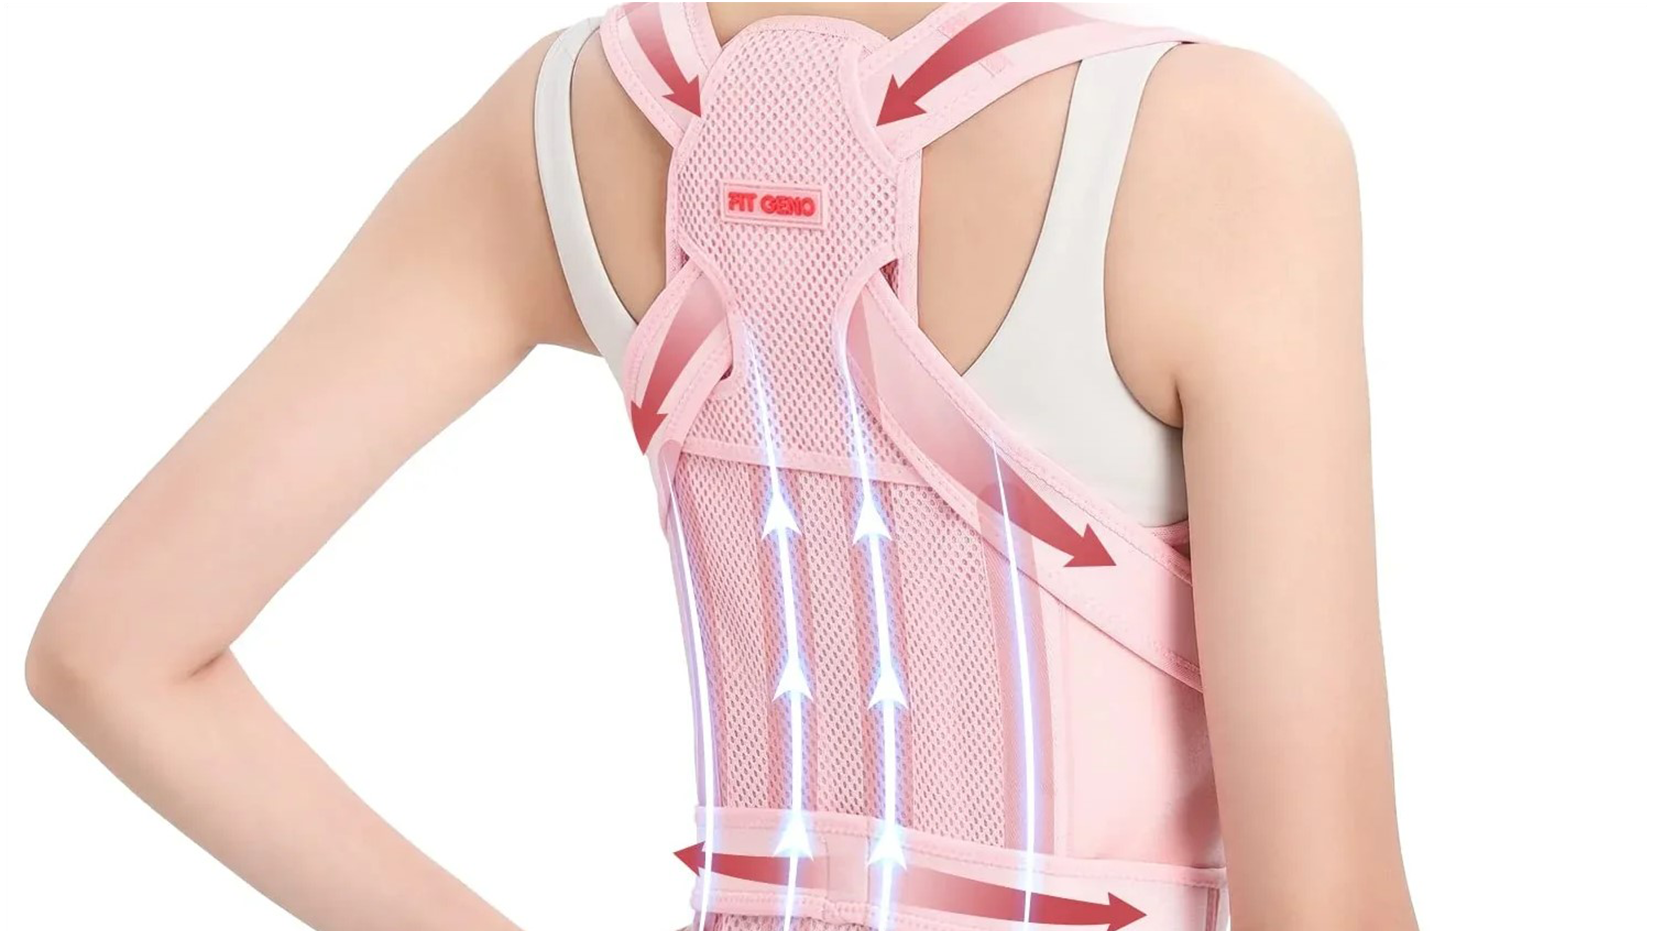 A Guide on How to Wear Back Brace for Maximum Effectiveness